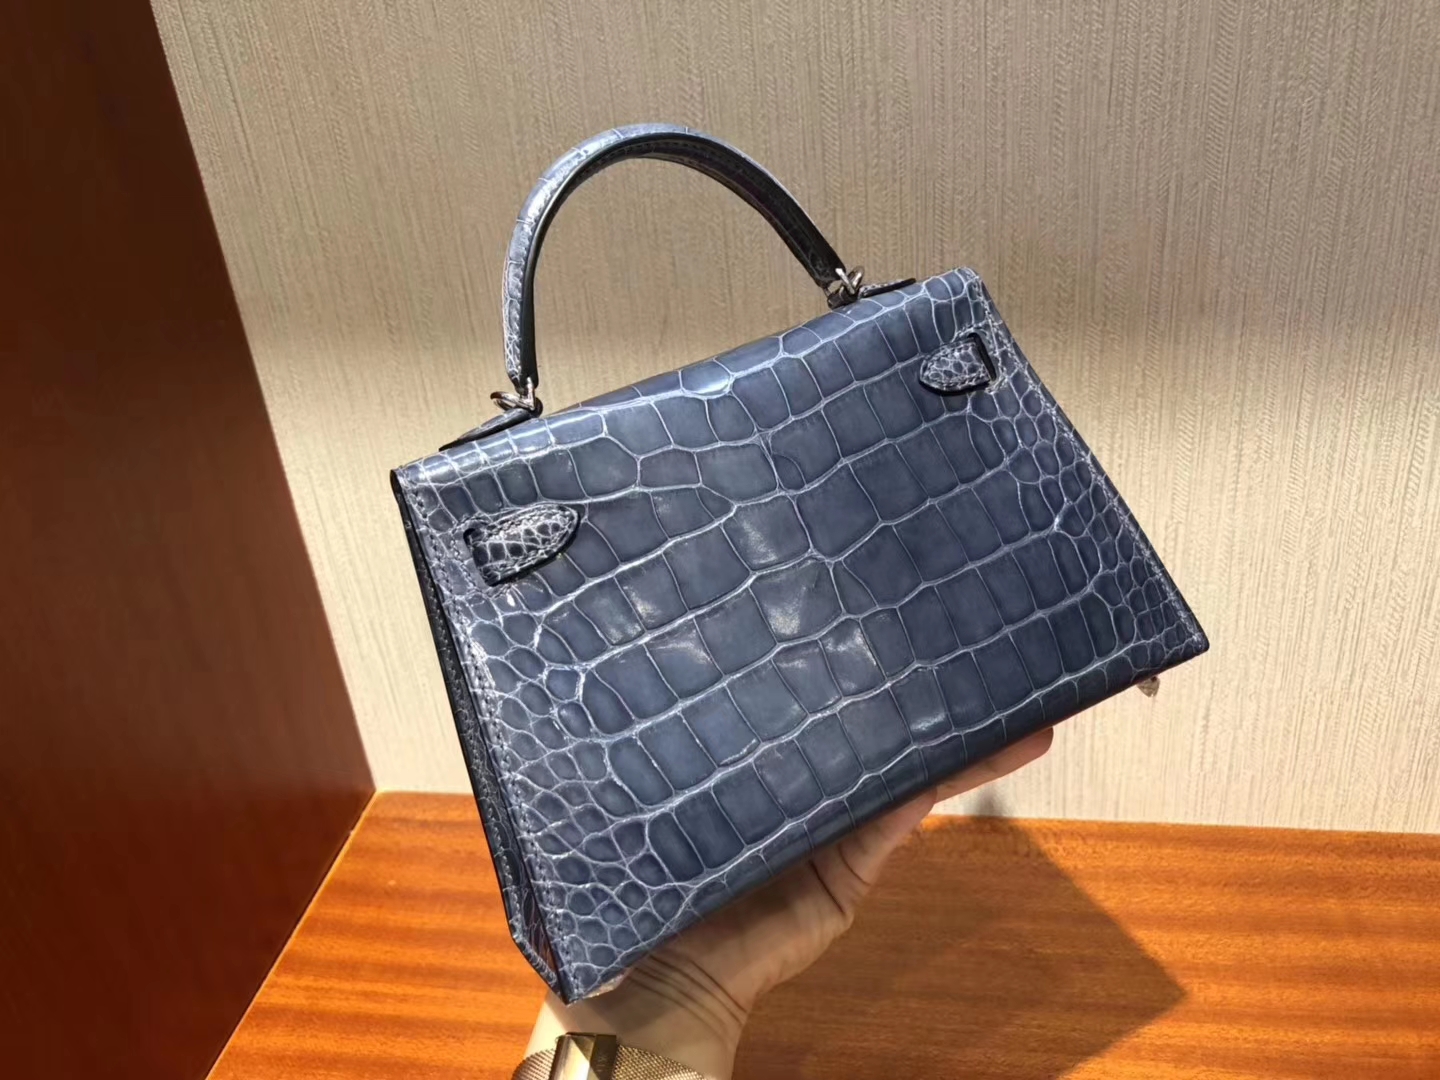 Stock Hermes N7 Blue Tempete Shiny Crocodile Minikelly-2 Evening Clutch Bag Silver Hardware